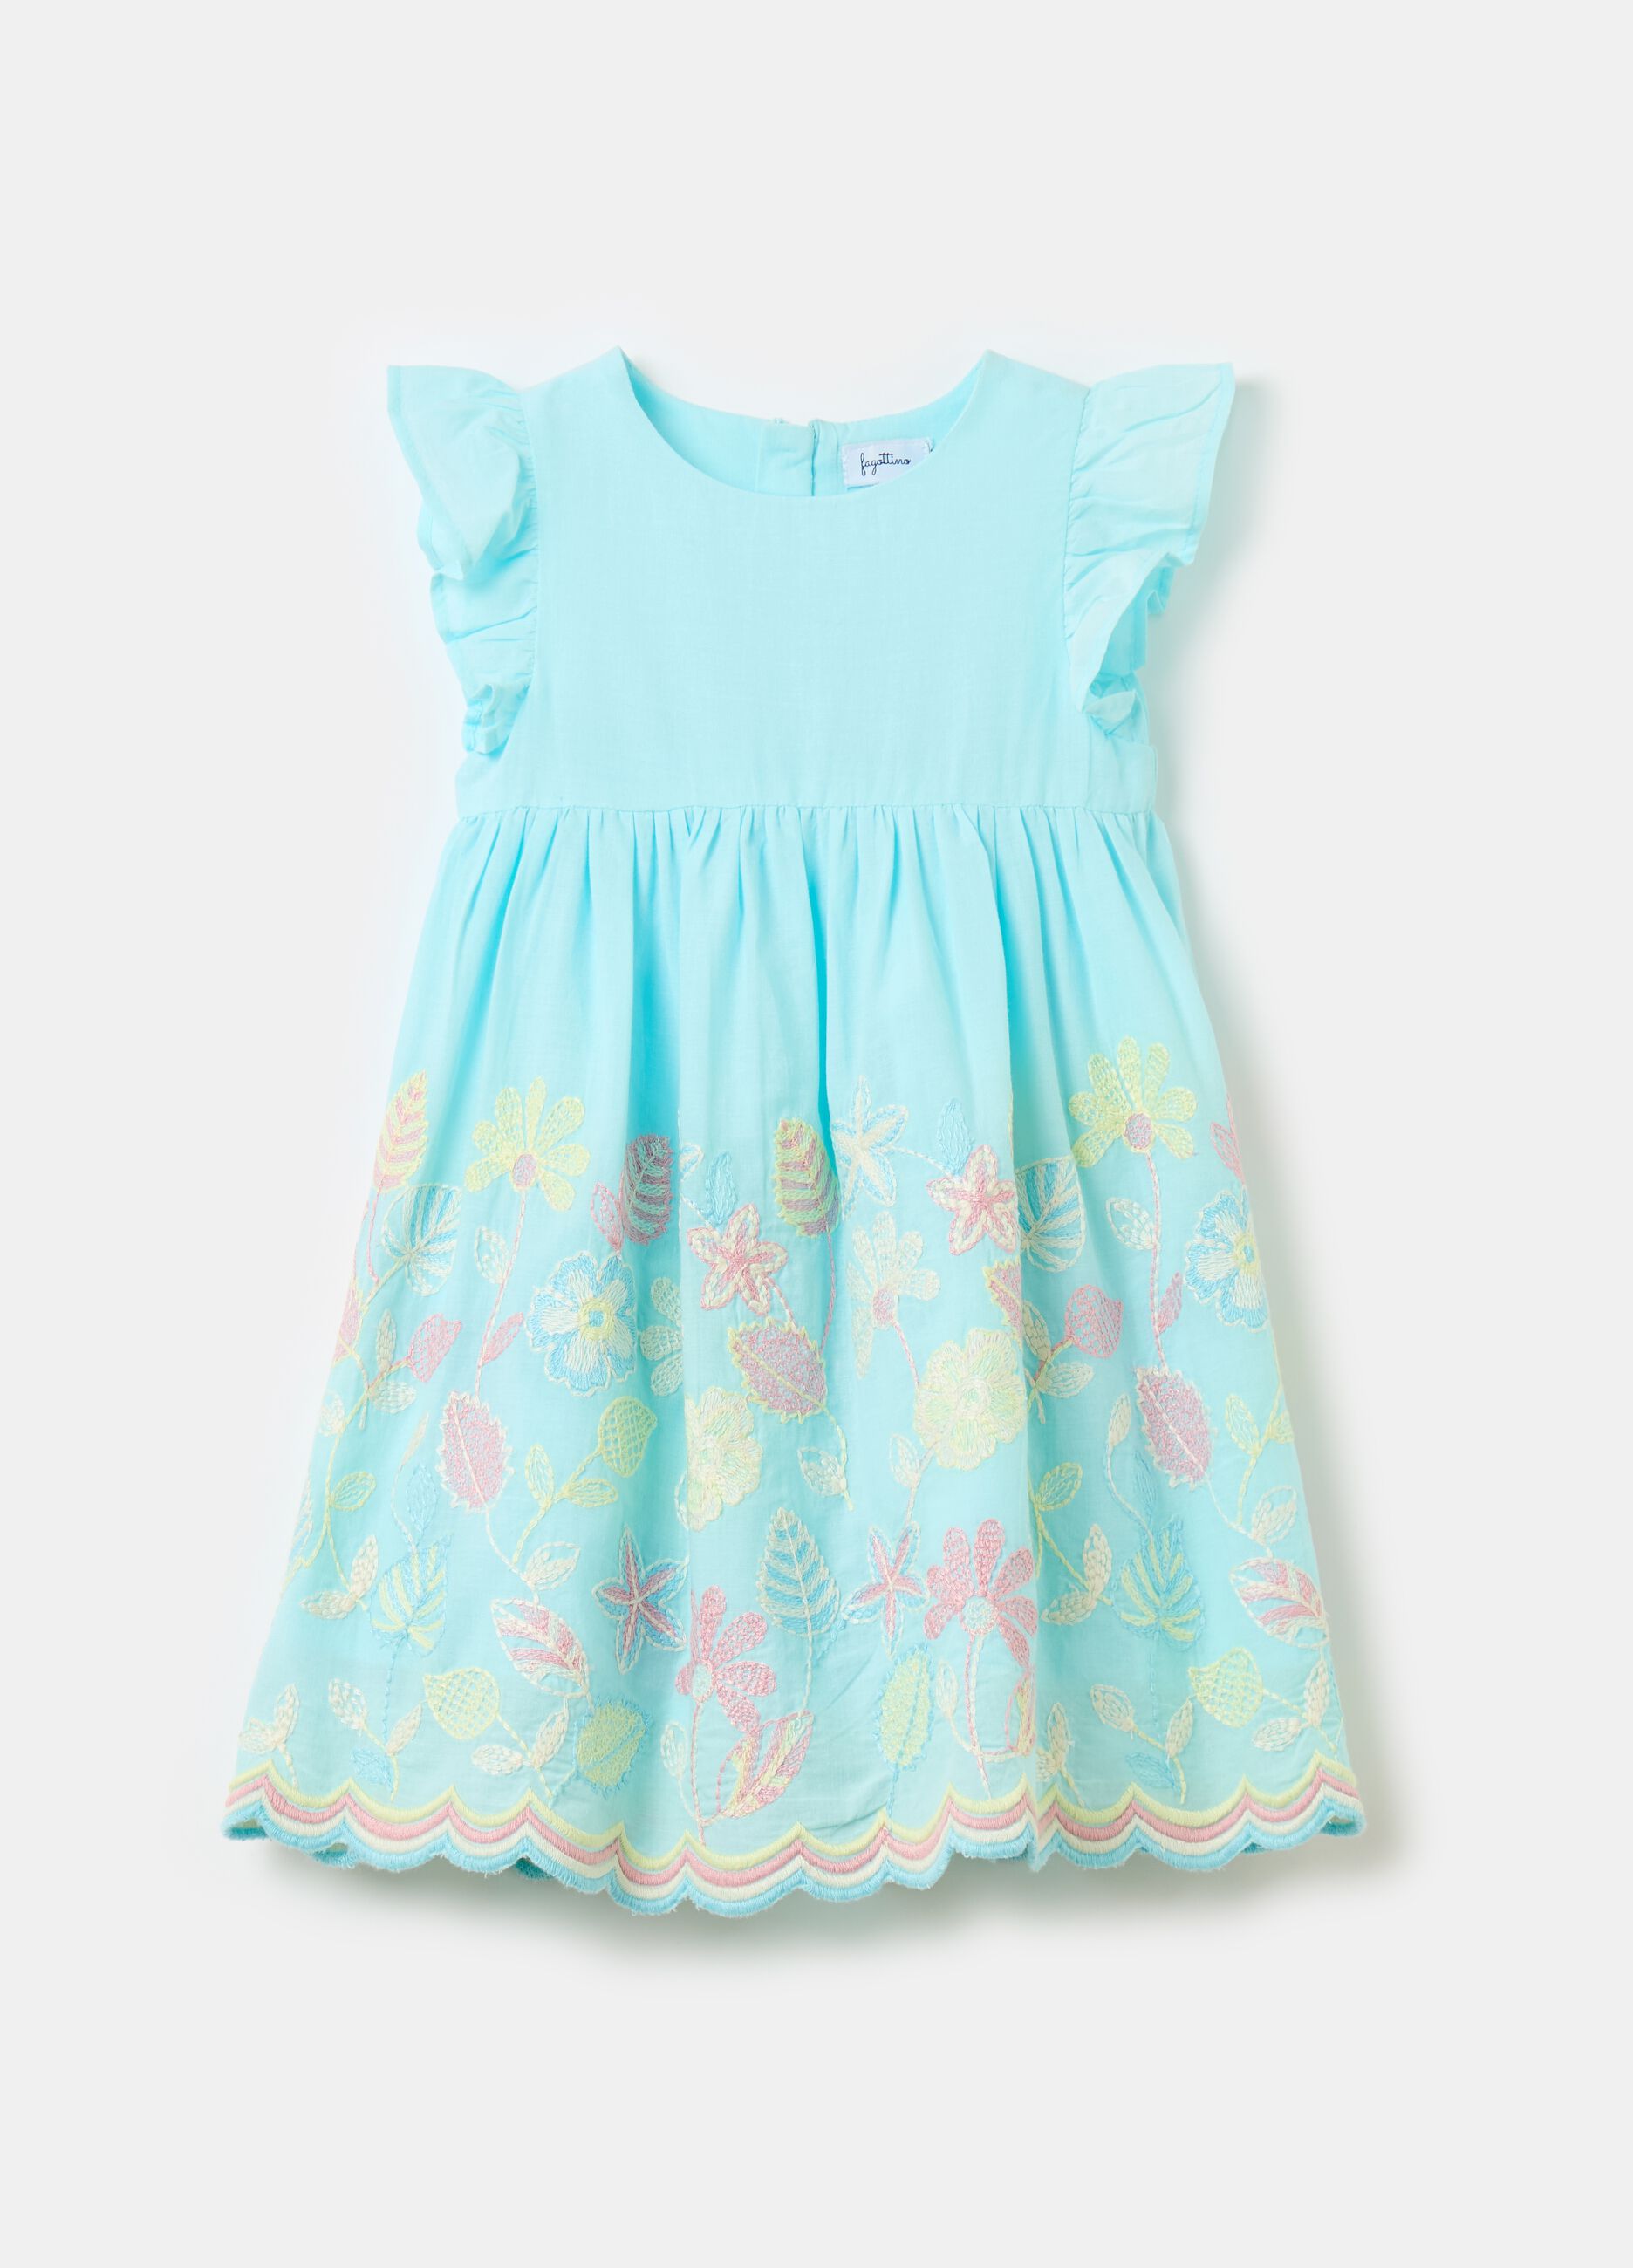 Cotton dress with floral embroidery